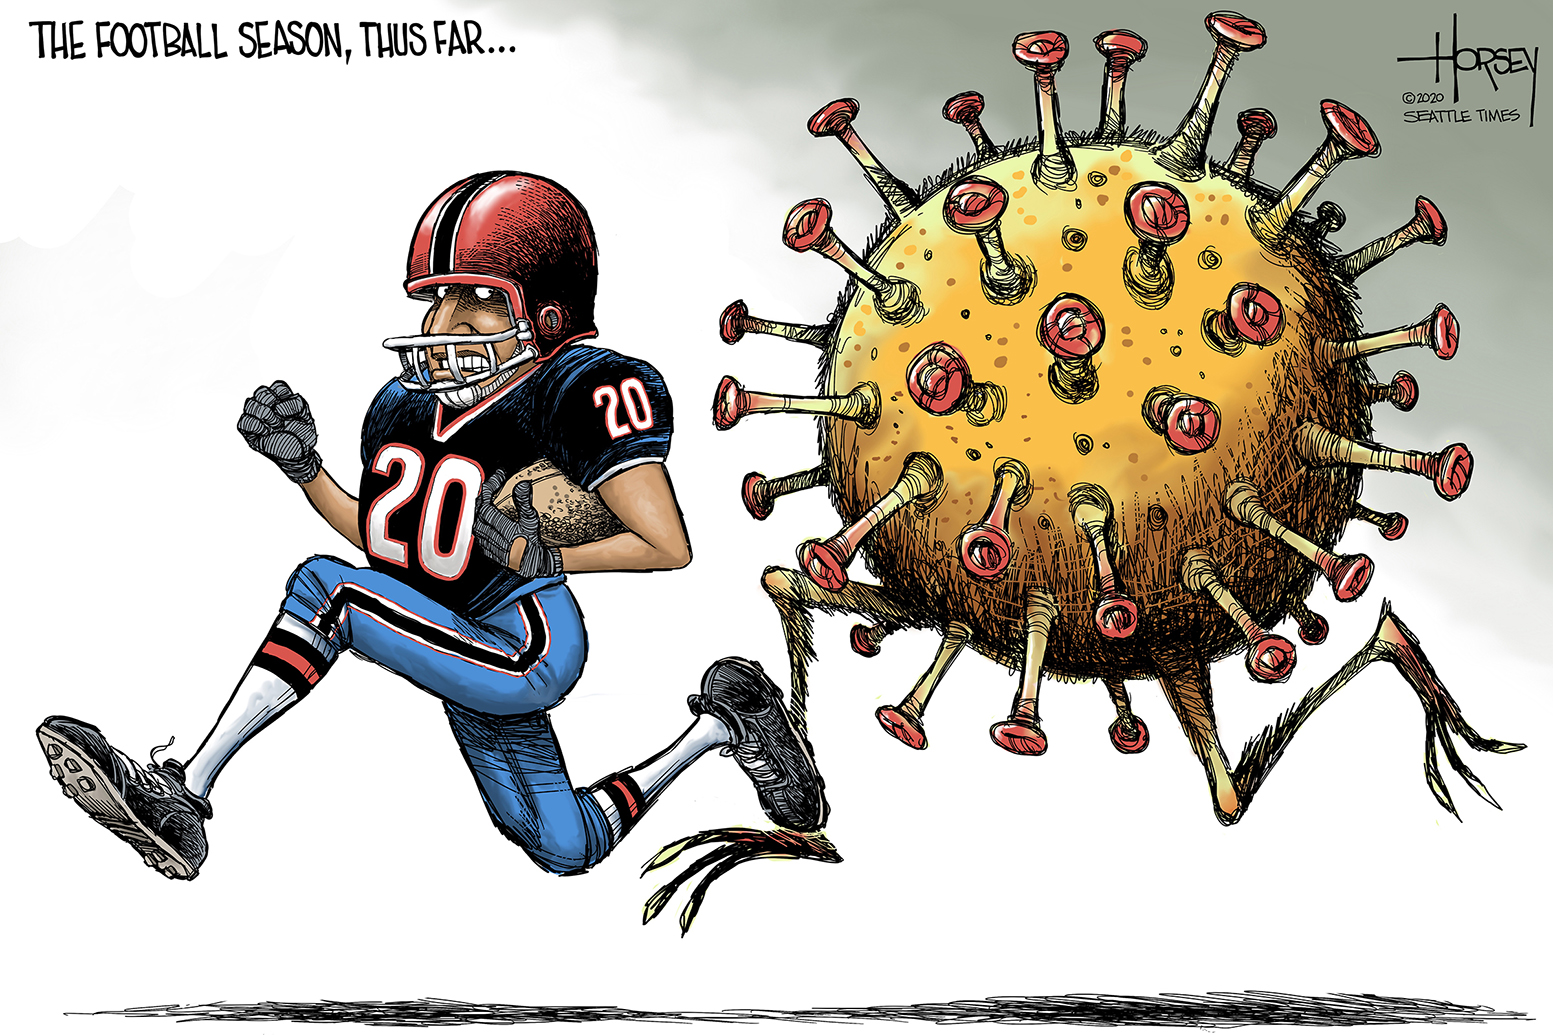 5 scathingly funny cartoons about the NFL's COVID problem | The Week